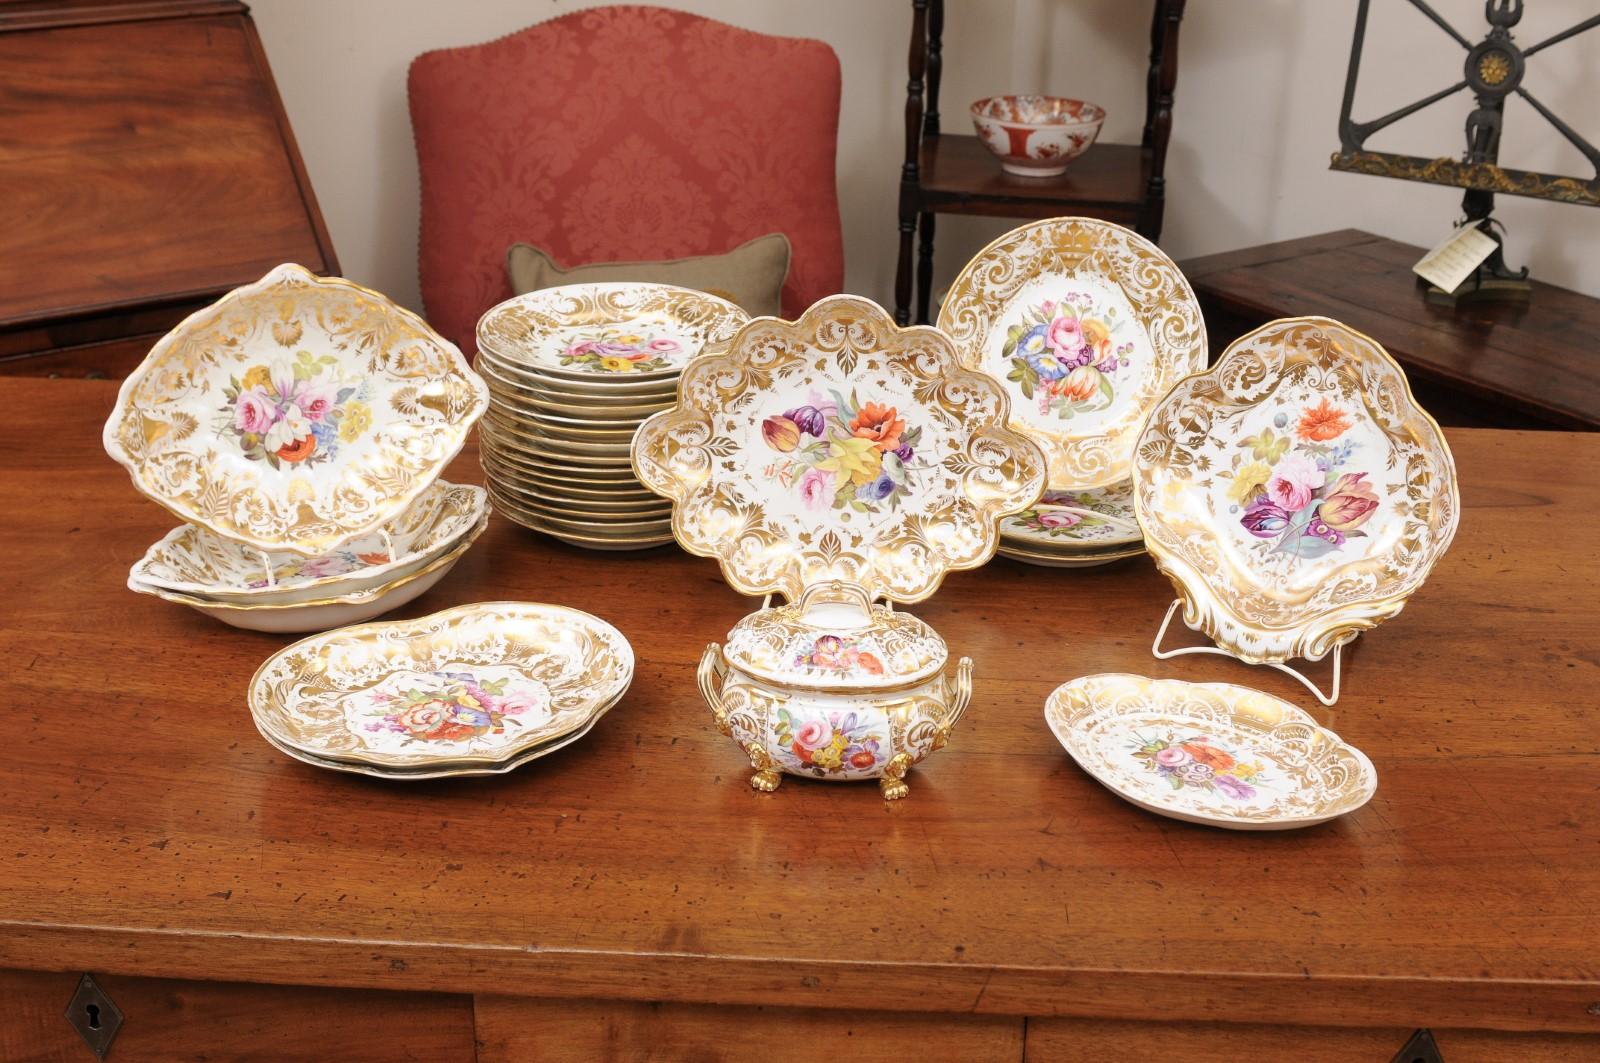 Set of Early 19th Century English Derby Porcelain Dessert Service. 18 plates, 7 shaped dishes, 1 sauce tureen with lid and underplate.